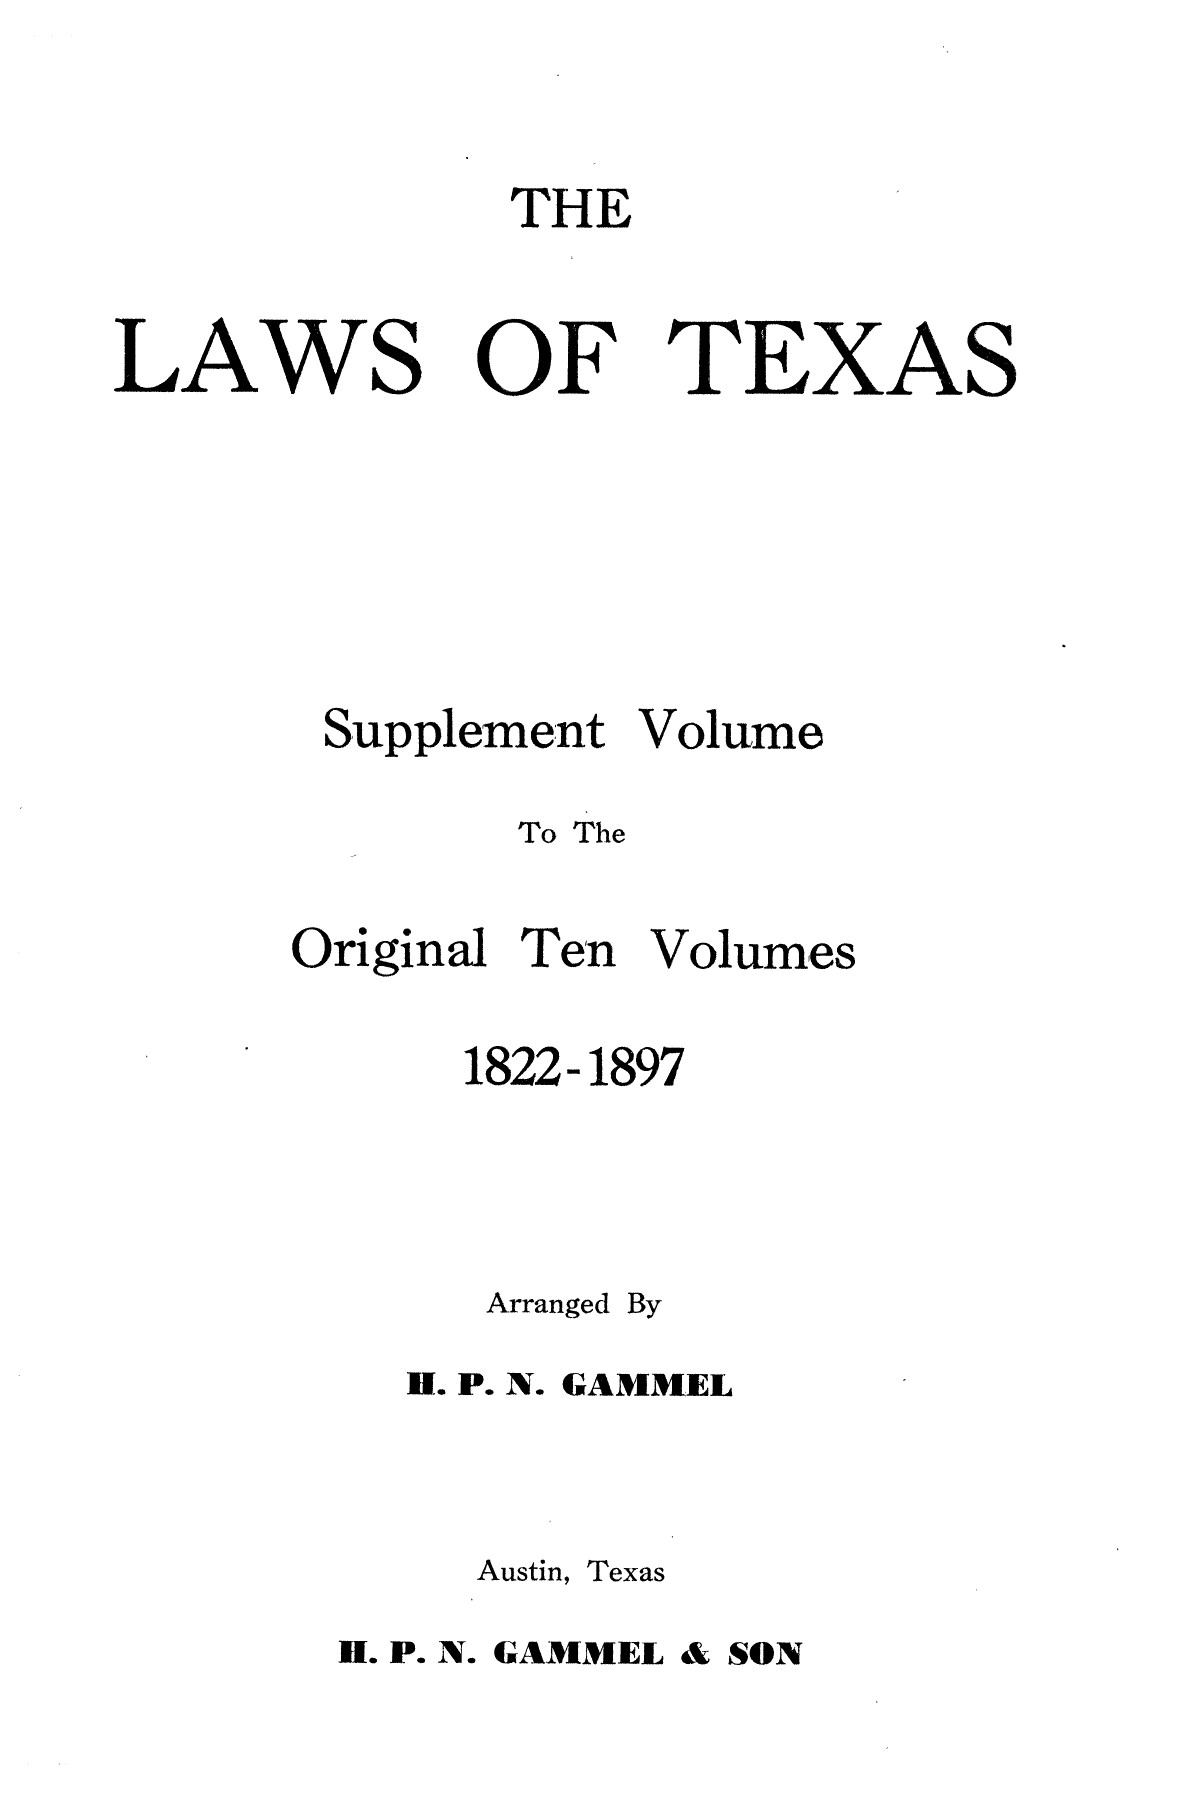 The Laws of Texas, 1935-1937 [Volume 30]
                                                
                                                    [Sequence #]: 1 of 2460
                                                